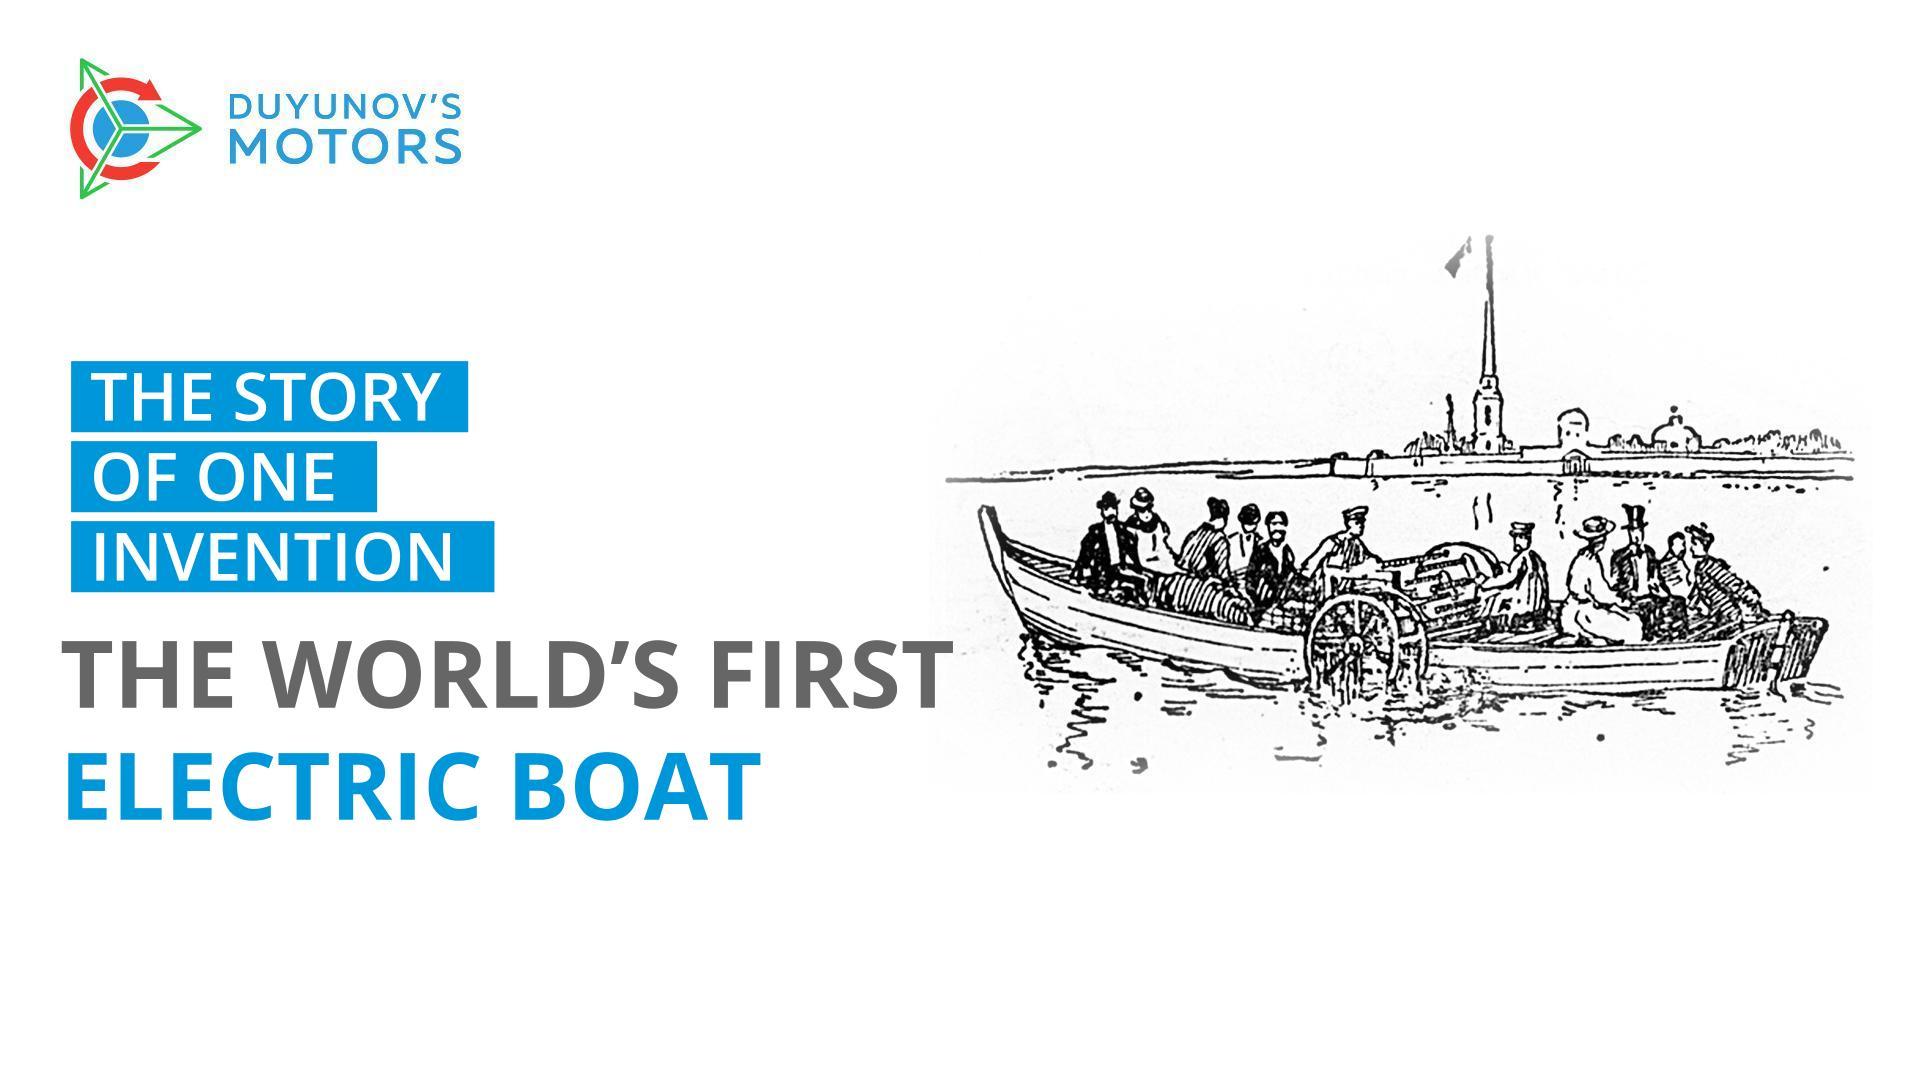 50,000 rubles, Russian citizenship, and Faraday's delight: the story of the world's first "electric boat"